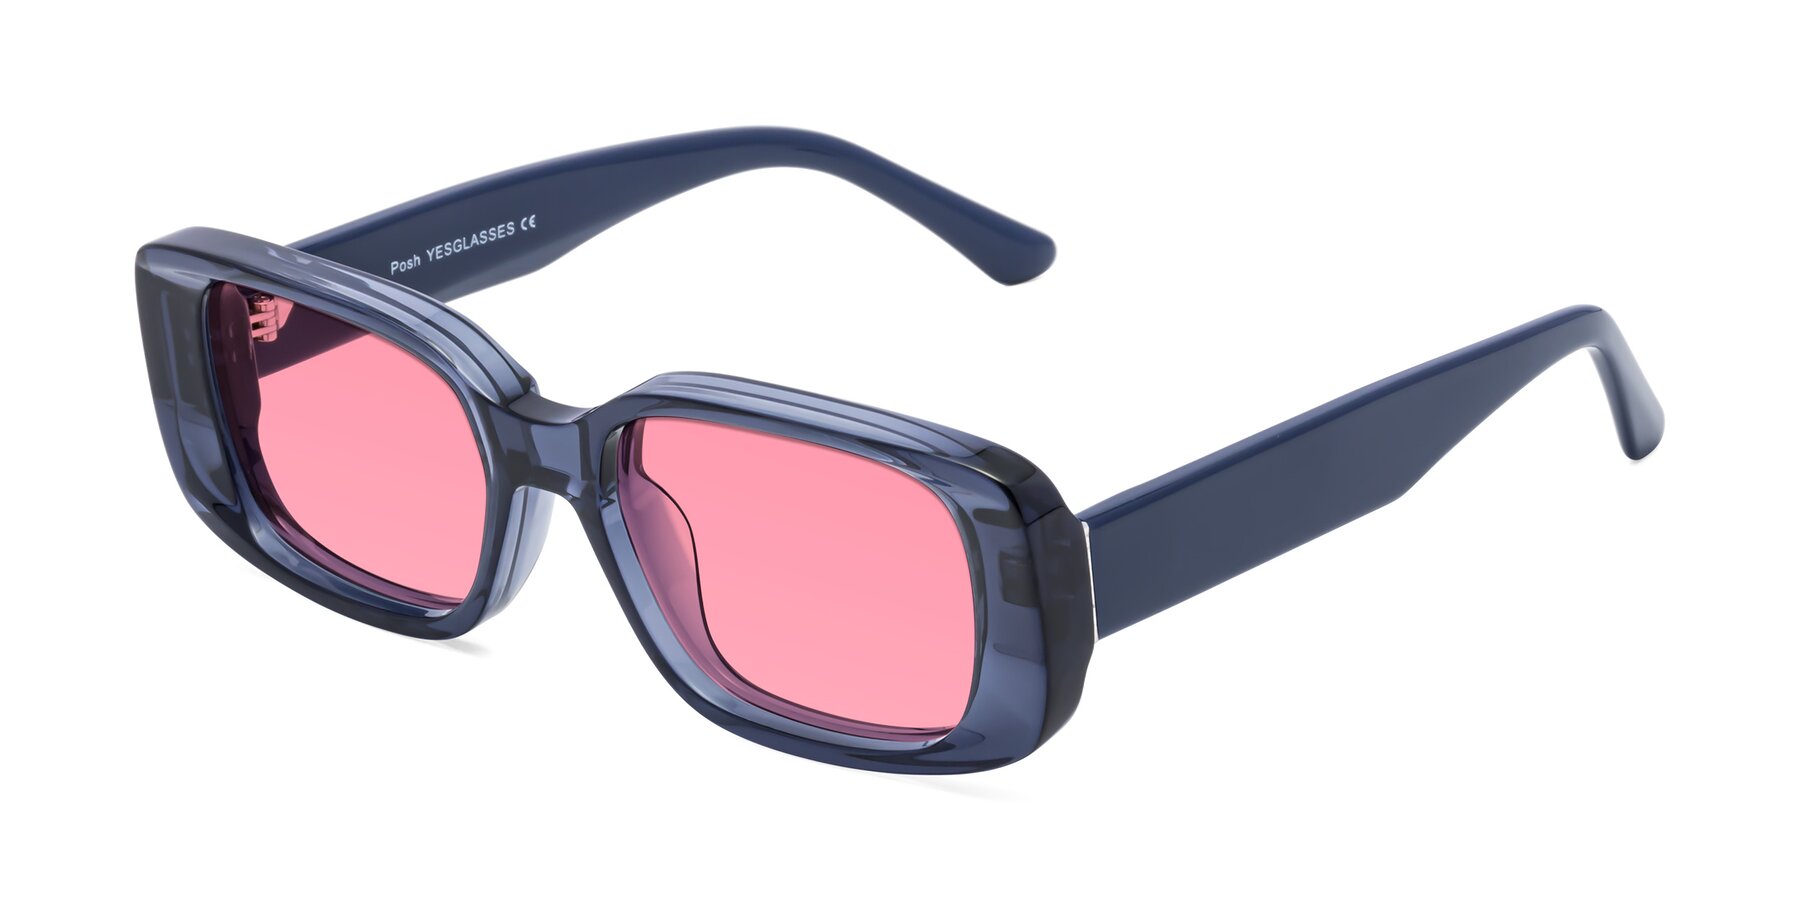 Angle of Posh in Translucent Blue with Pink Tinted Lenses